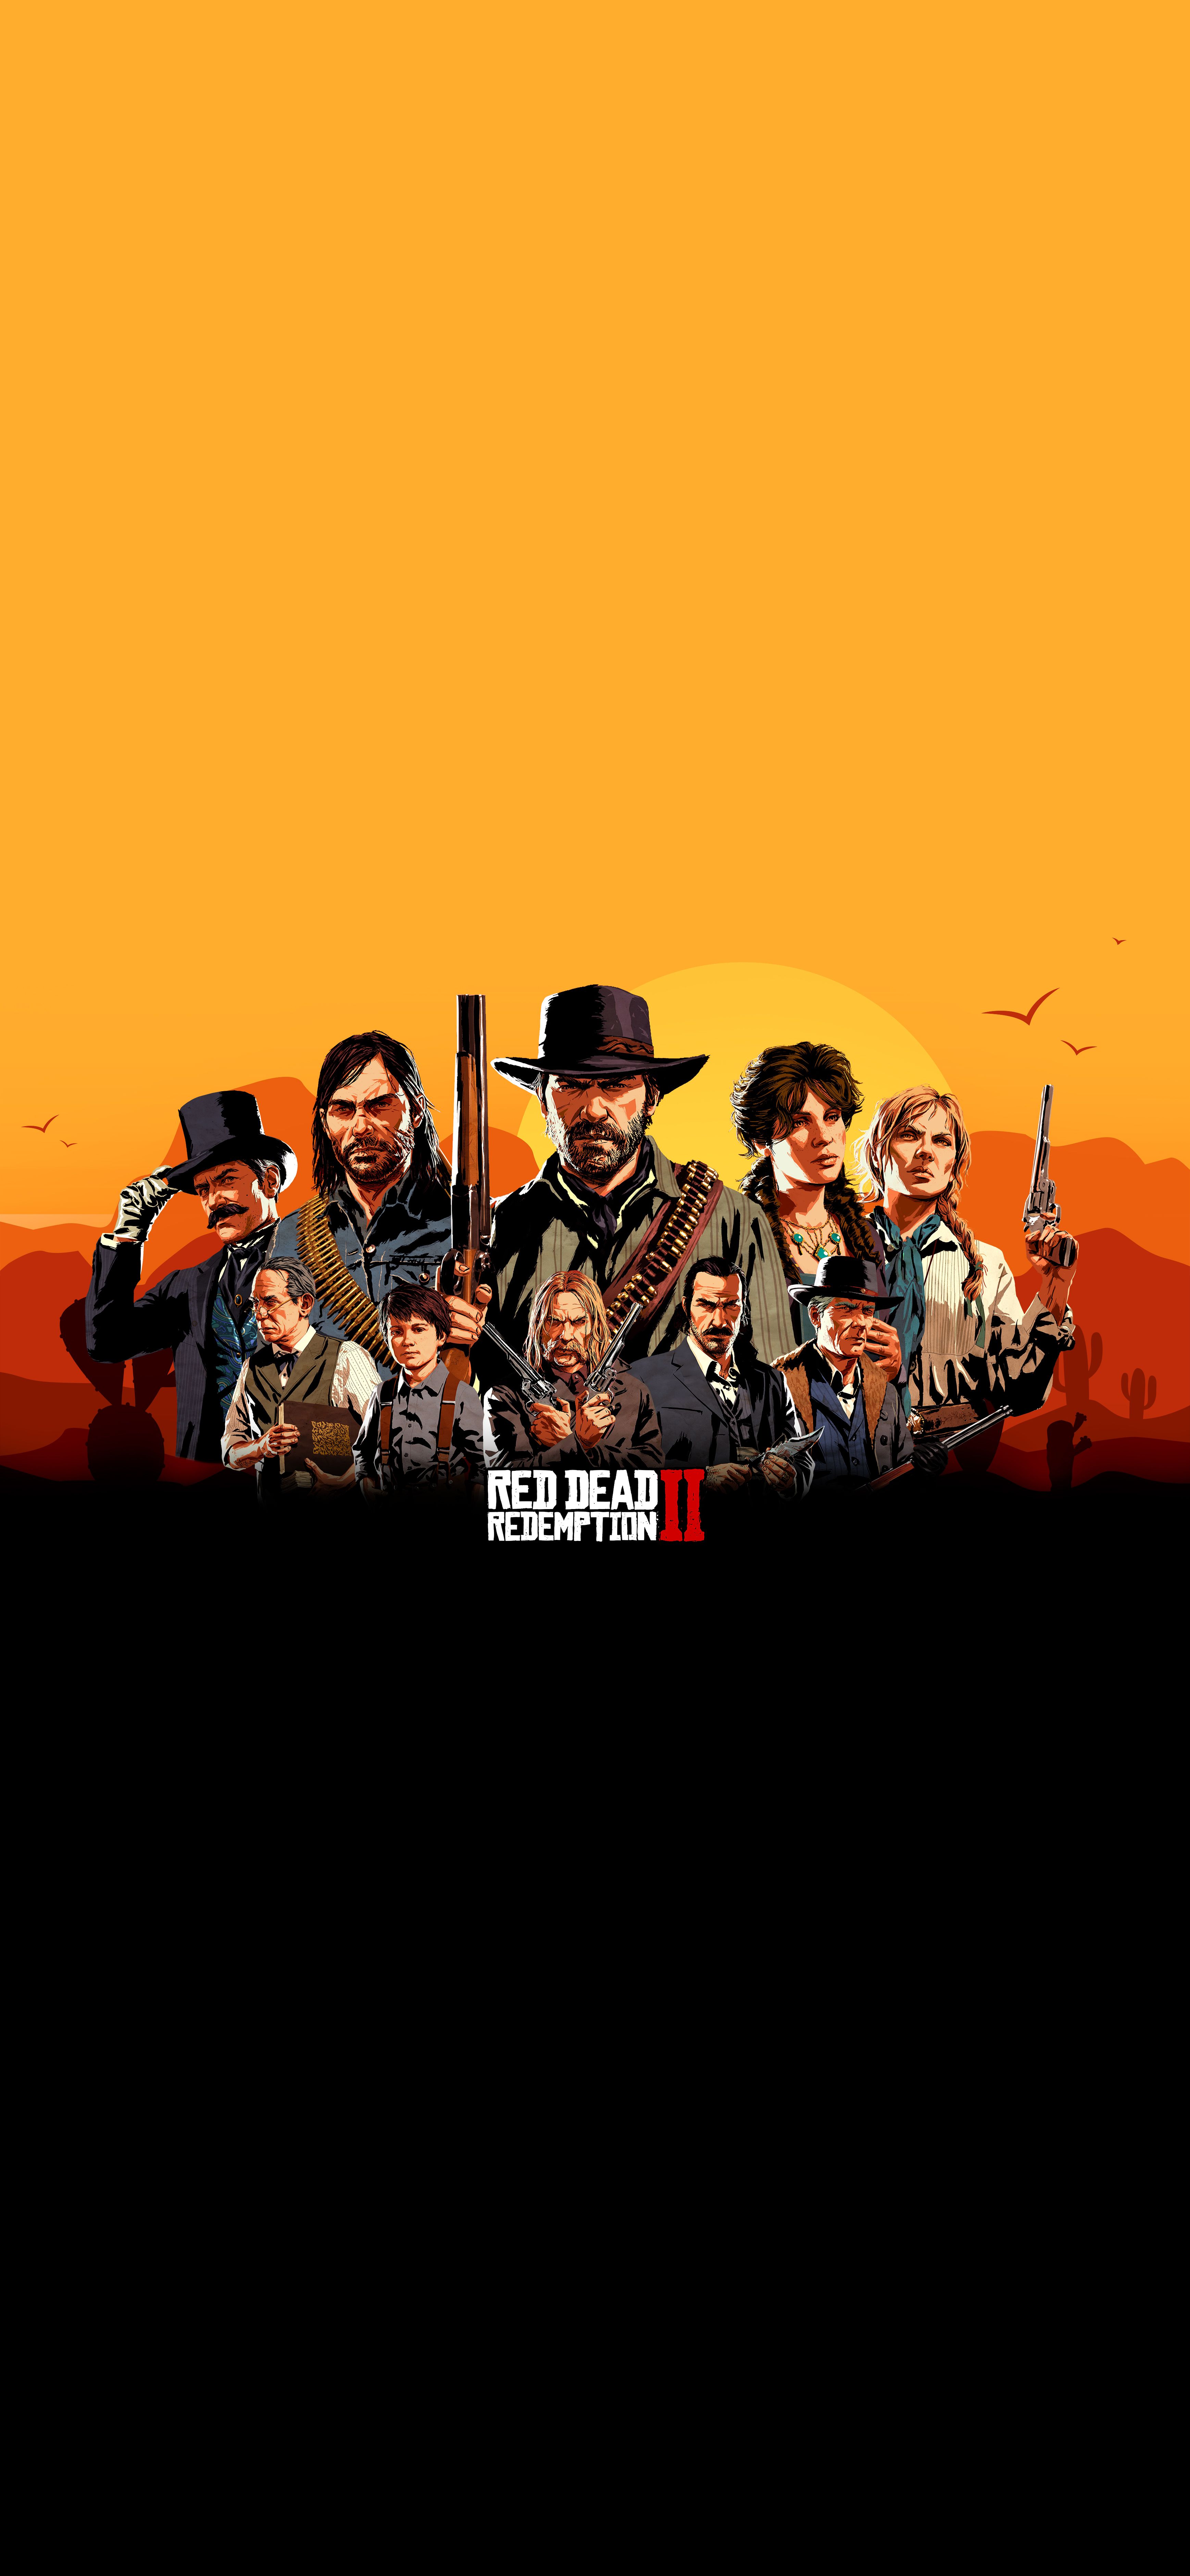 RED DEAD REDEMPTION 2 IPHONE WALLPAPER. Red dead redemption, Red dead redemption art, Red dead redemption 2